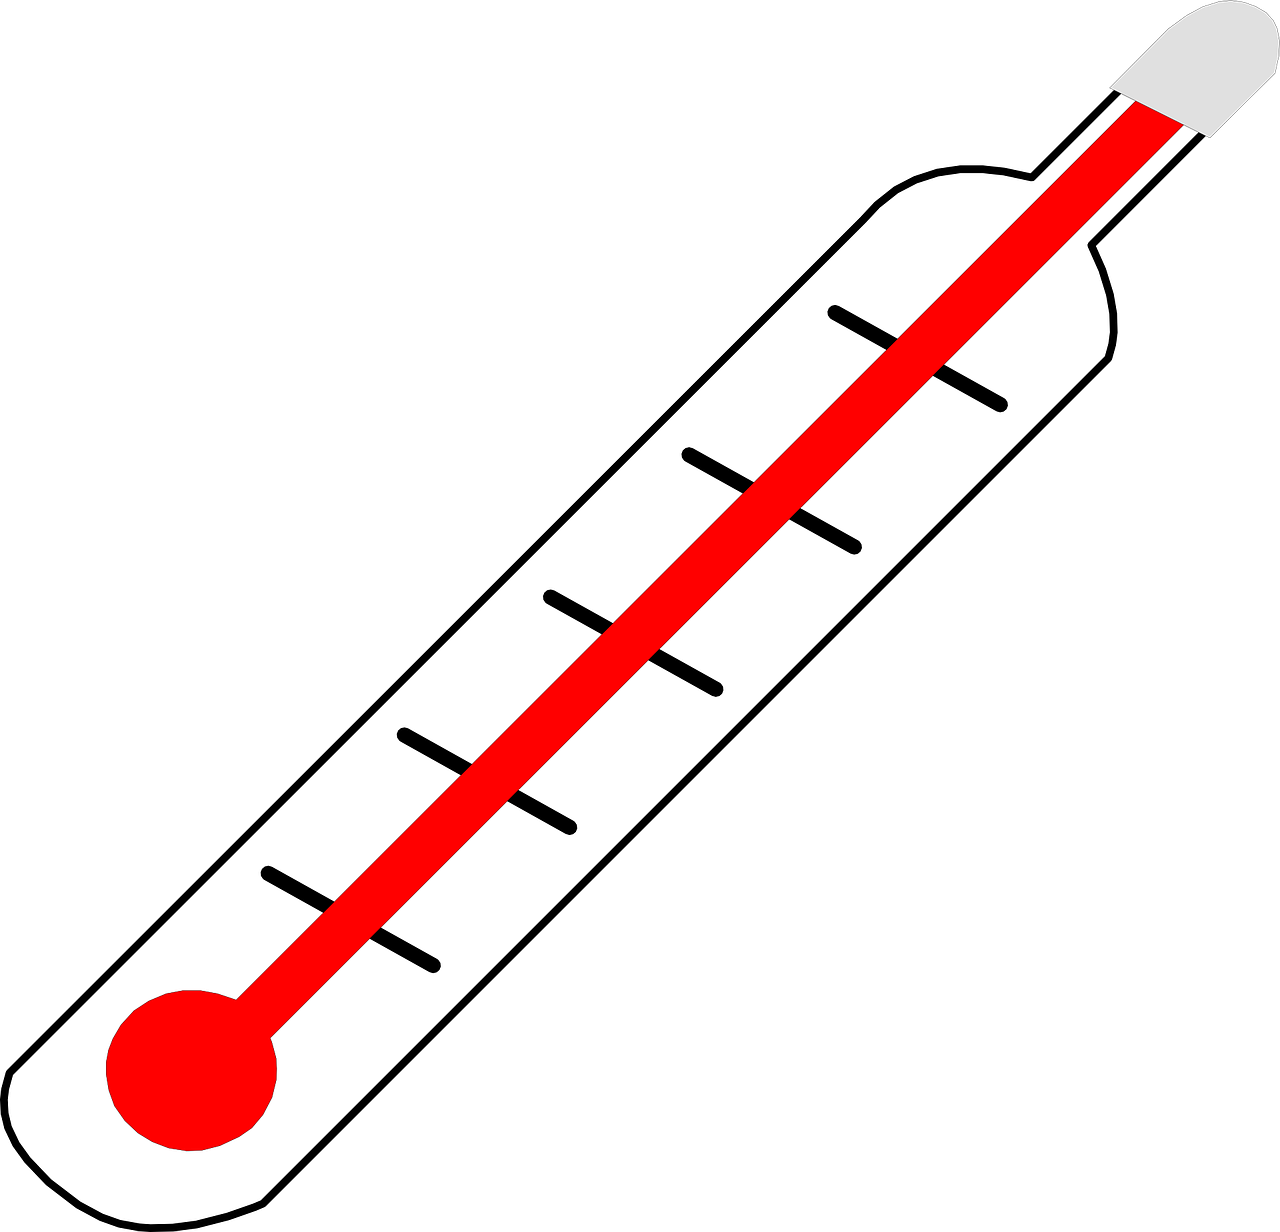 Classic Mercury Thermometer Vector PNG